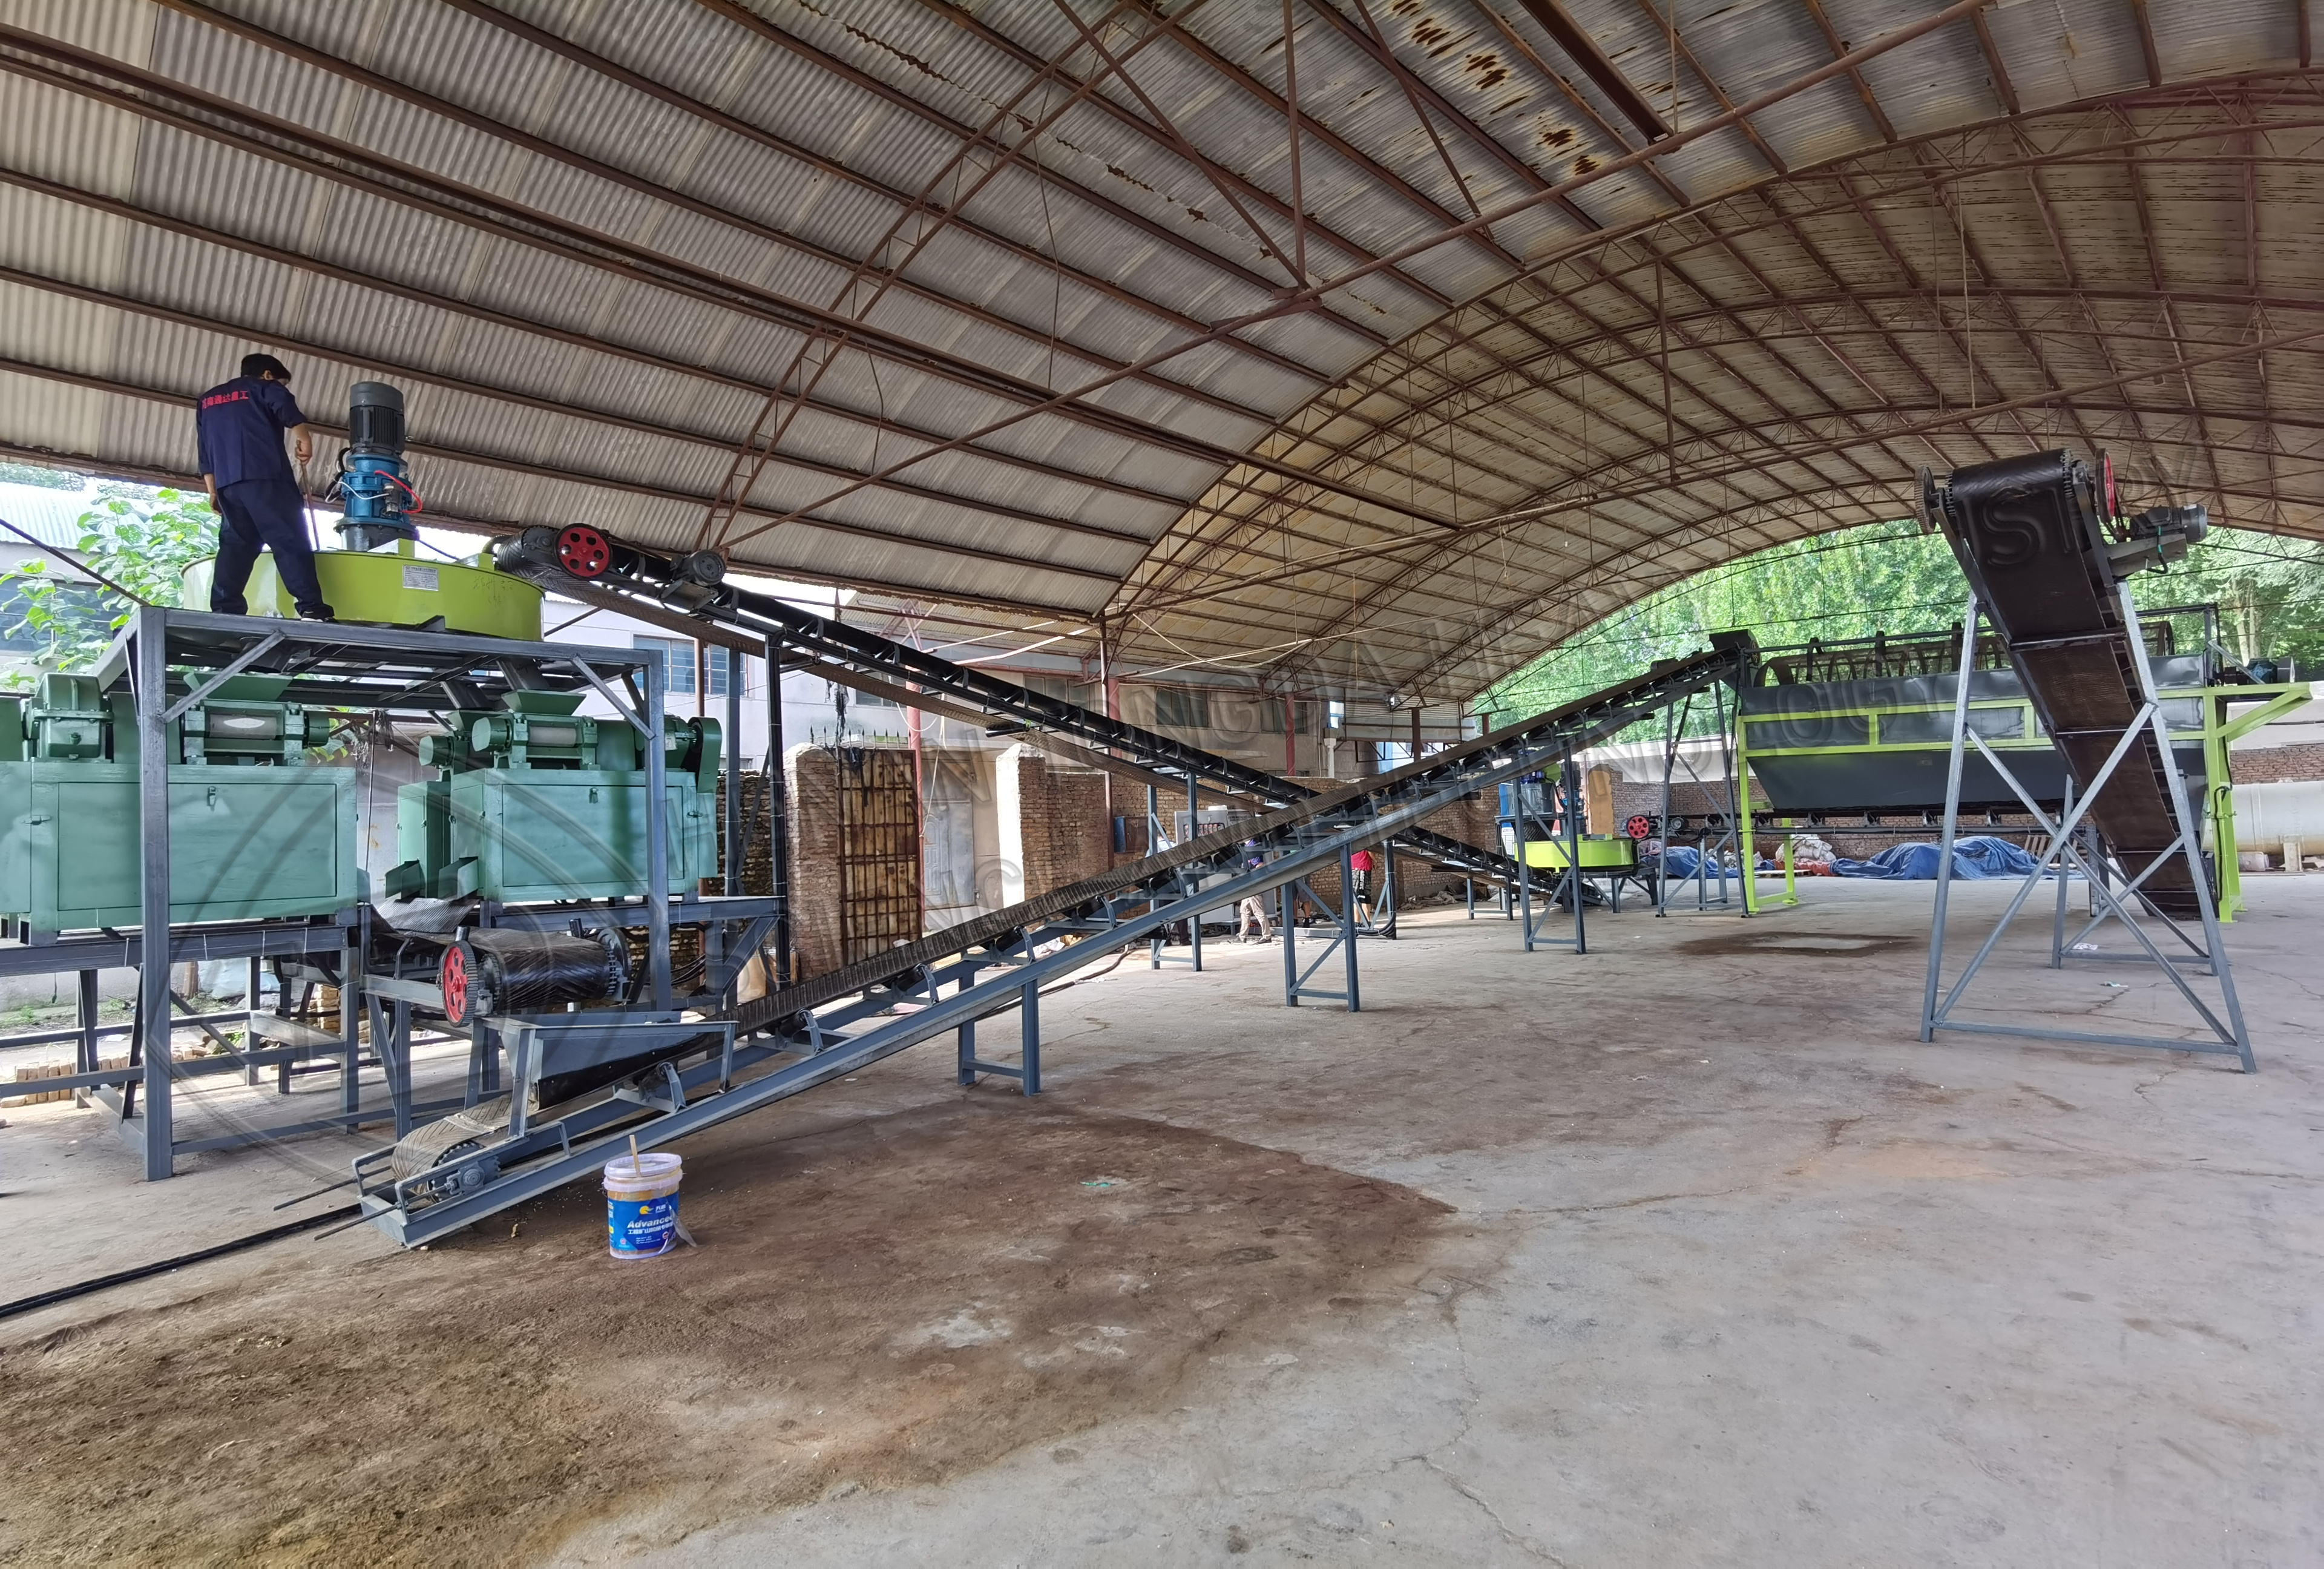 What equipment are need for the organic fertilizer production line